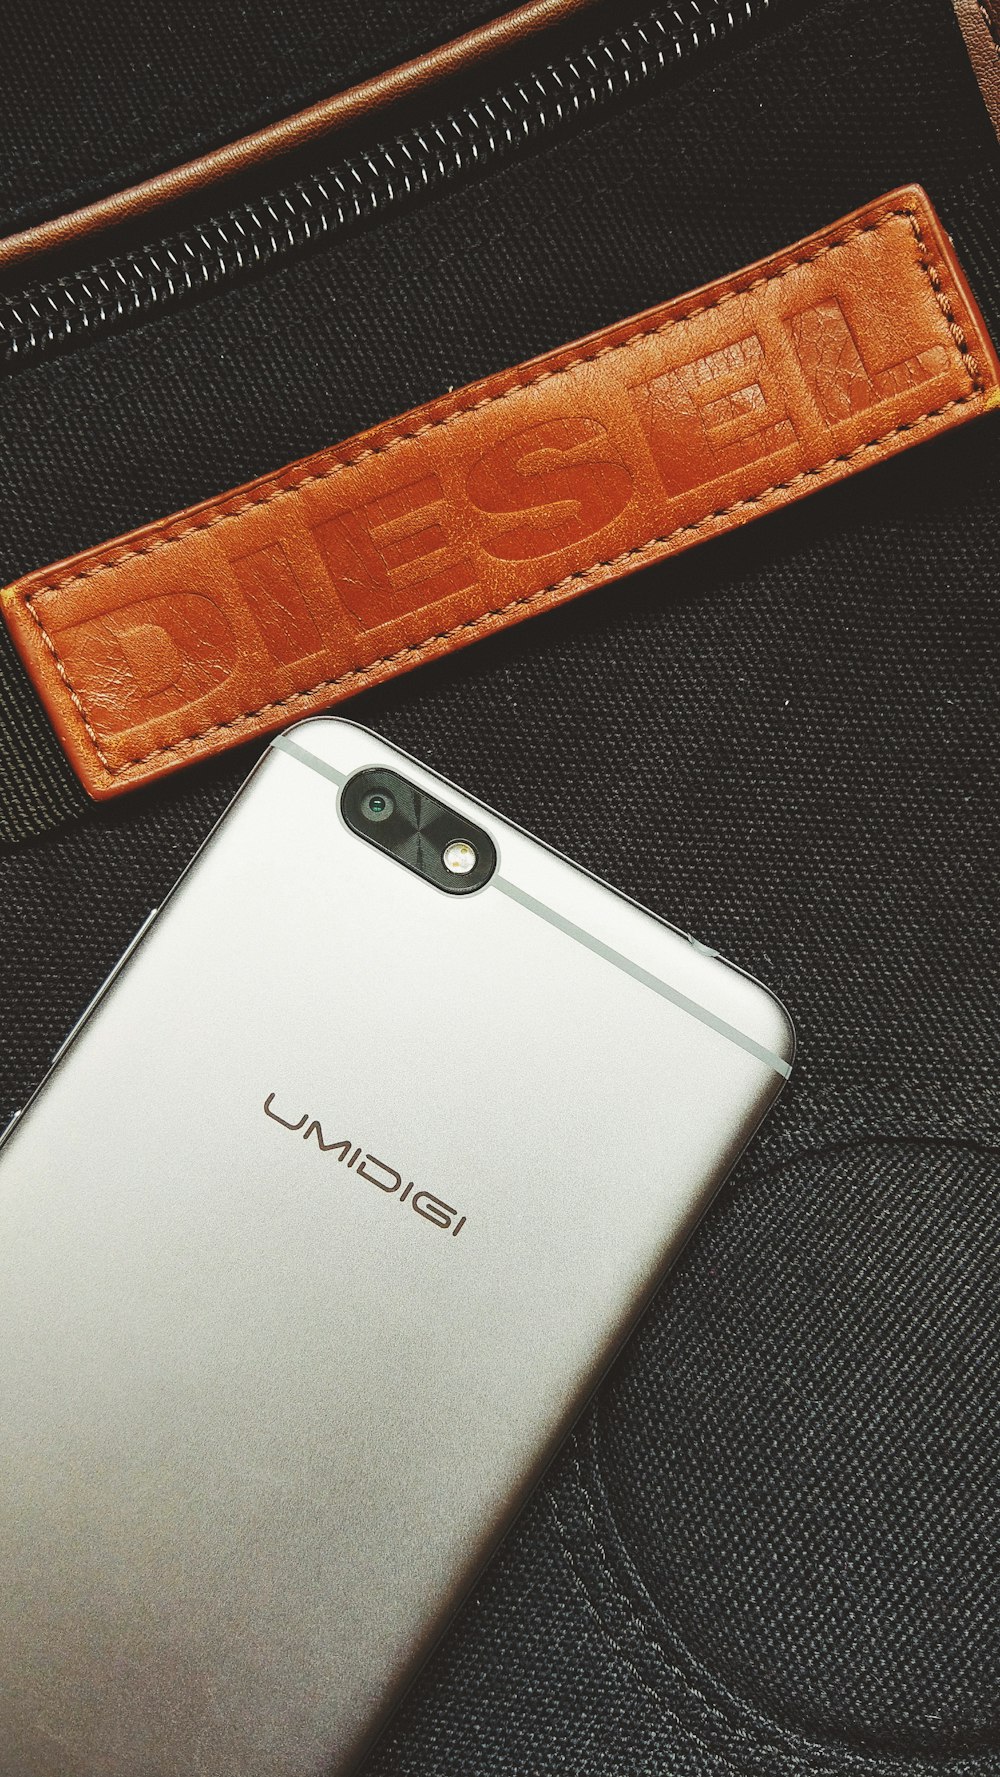 A smartphone on a Diesel branded product.